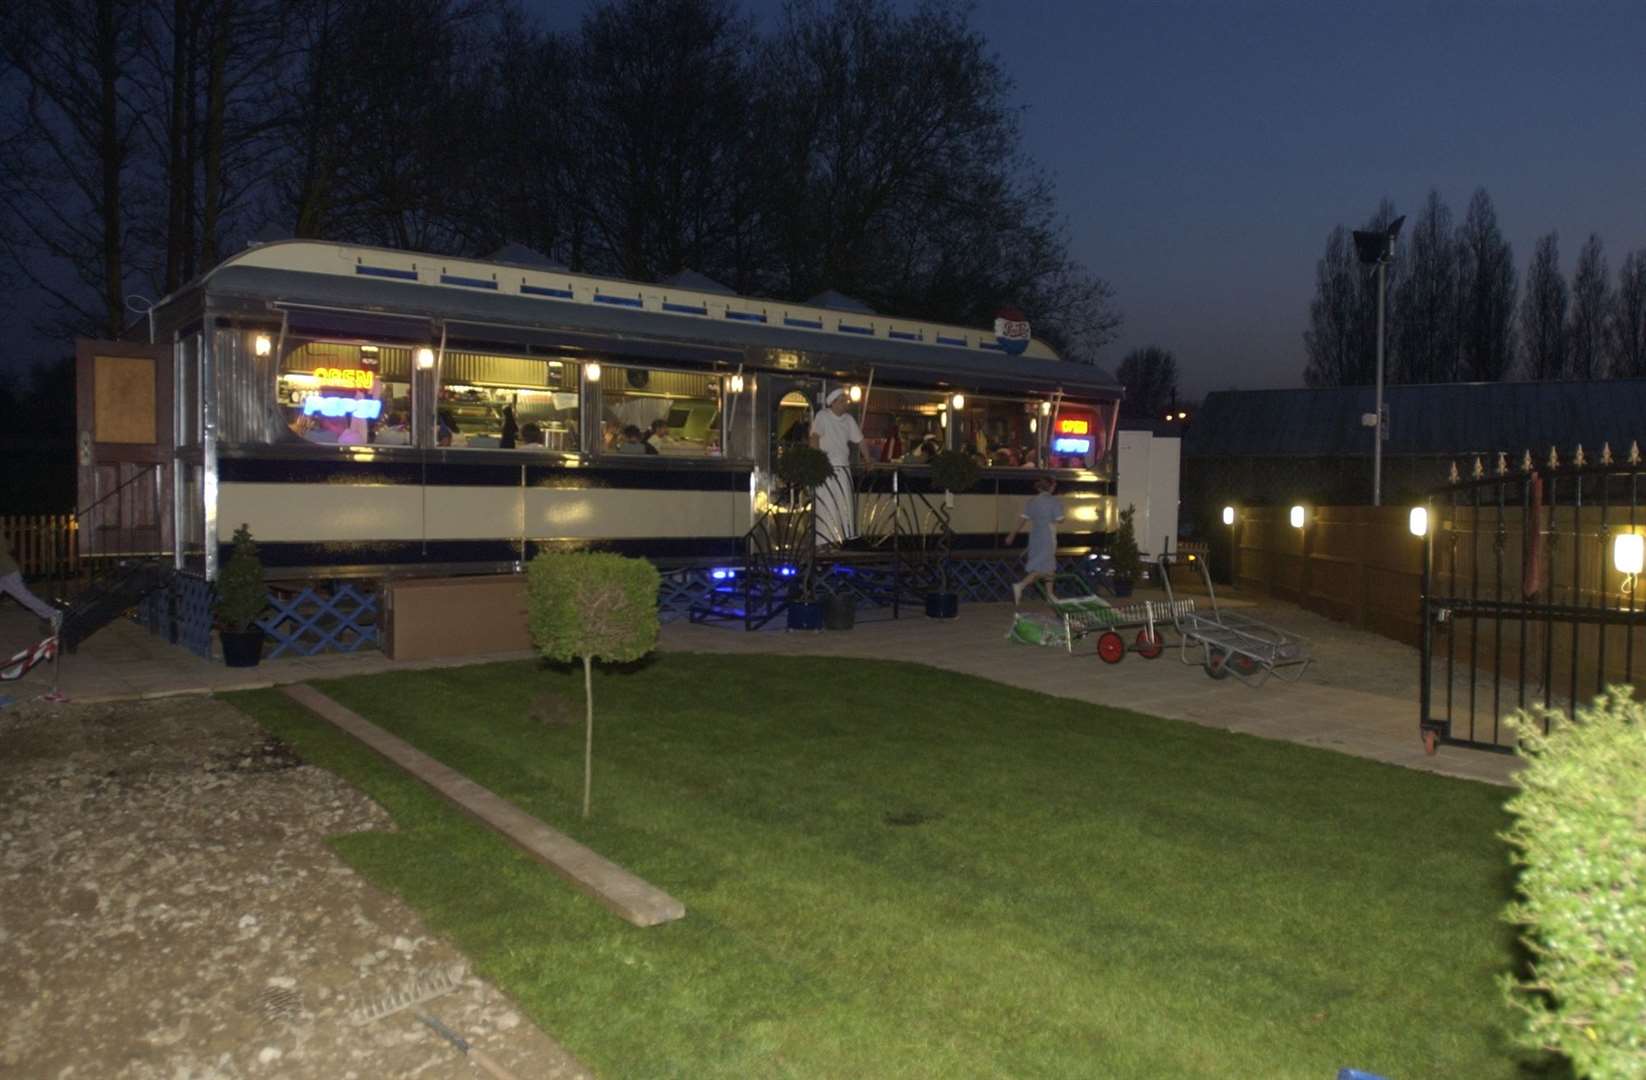 Kennington has been home to an American restaurant before - this mobile diner opened next to Bybrook Barn in 2002